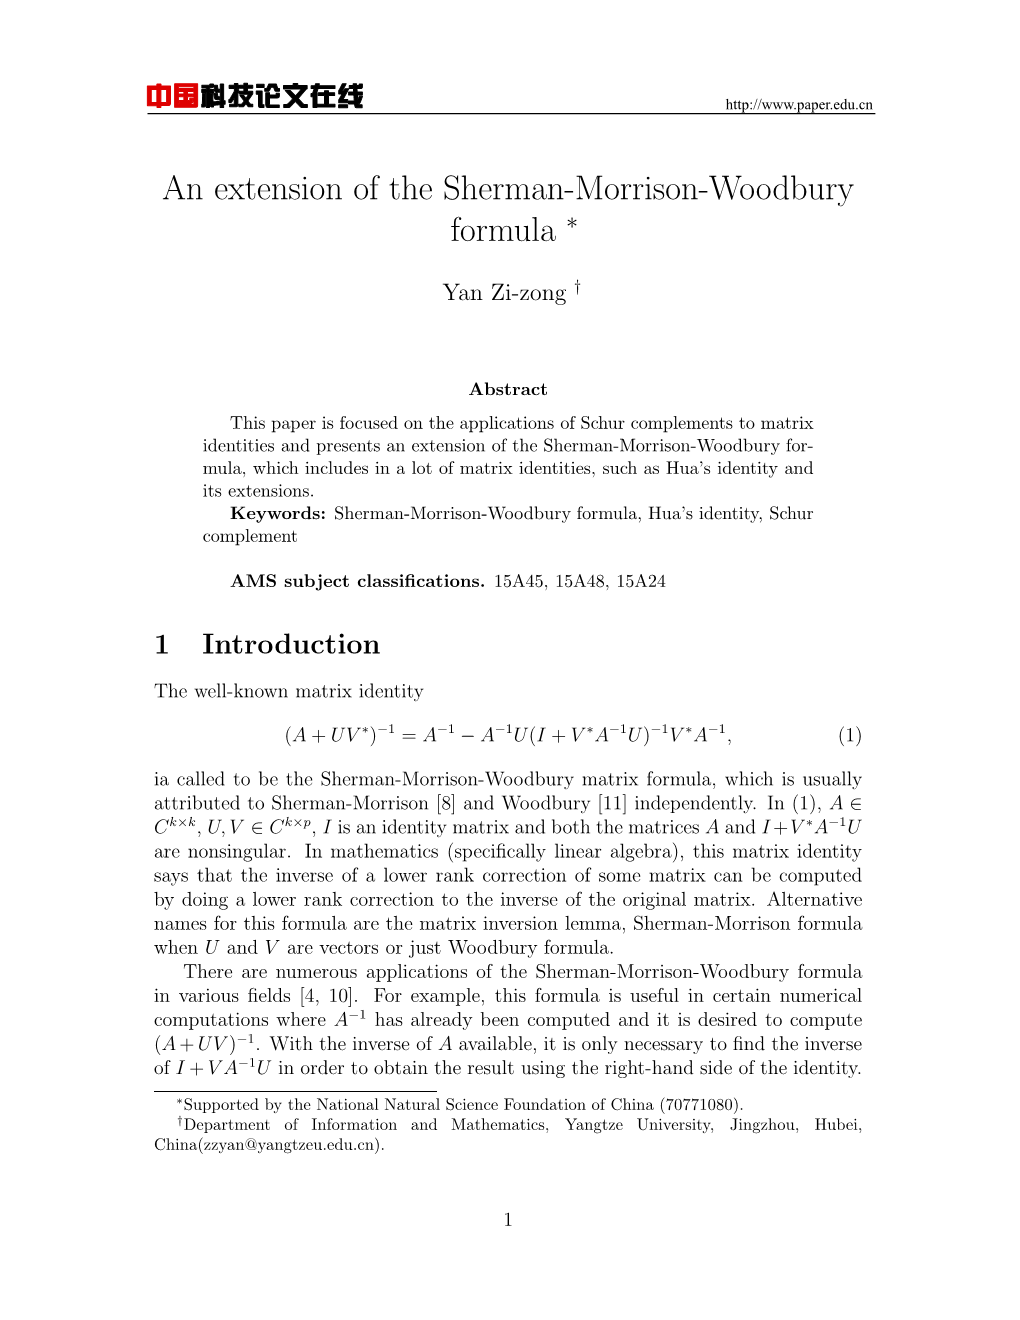 An Extension of the Sherman-Morrison-Woodbury Formula ∗